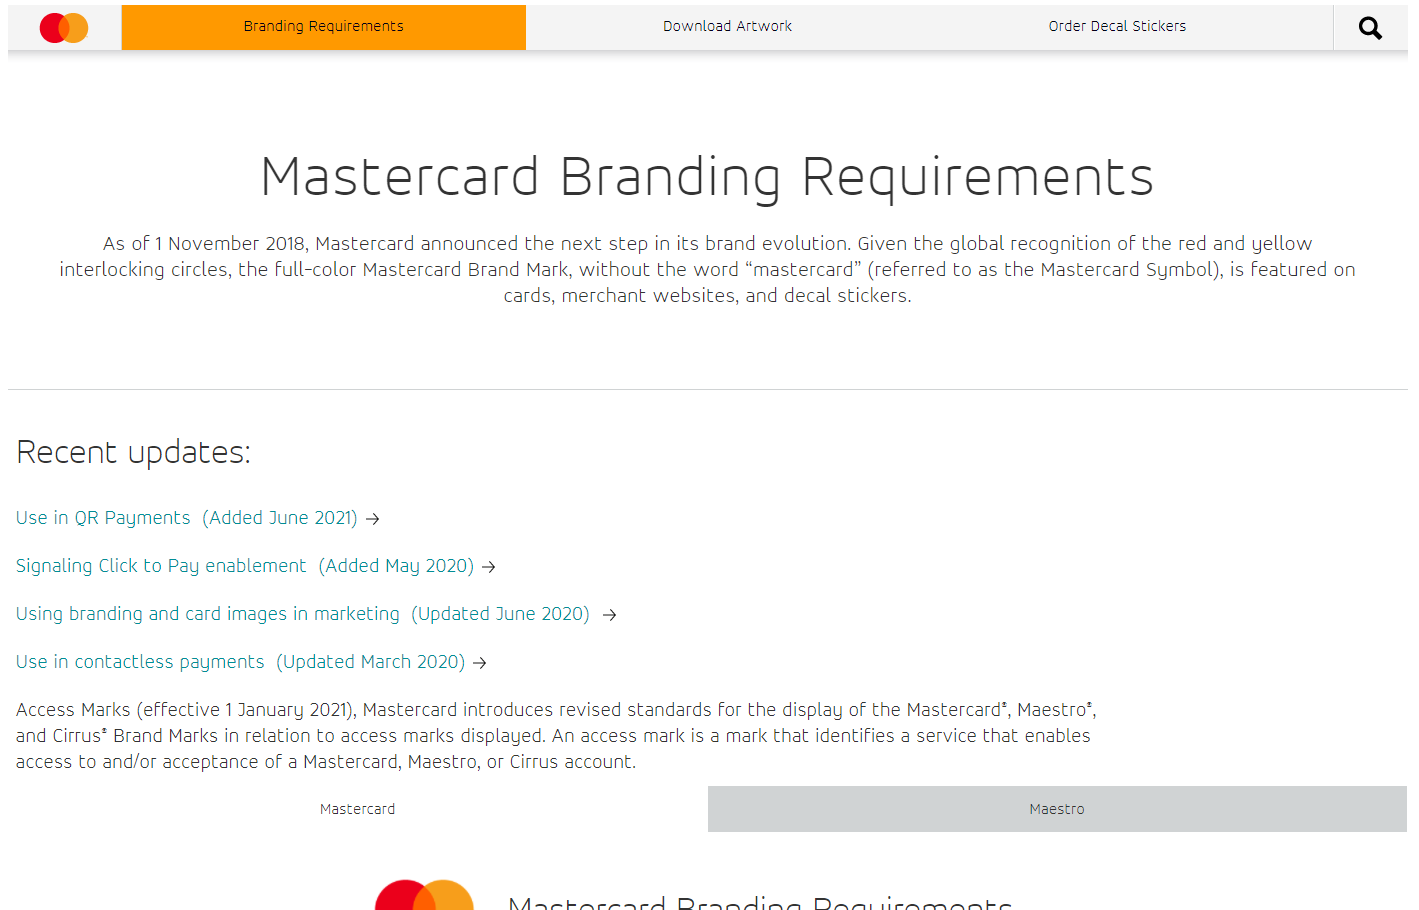 Mastercard's Brand Guide